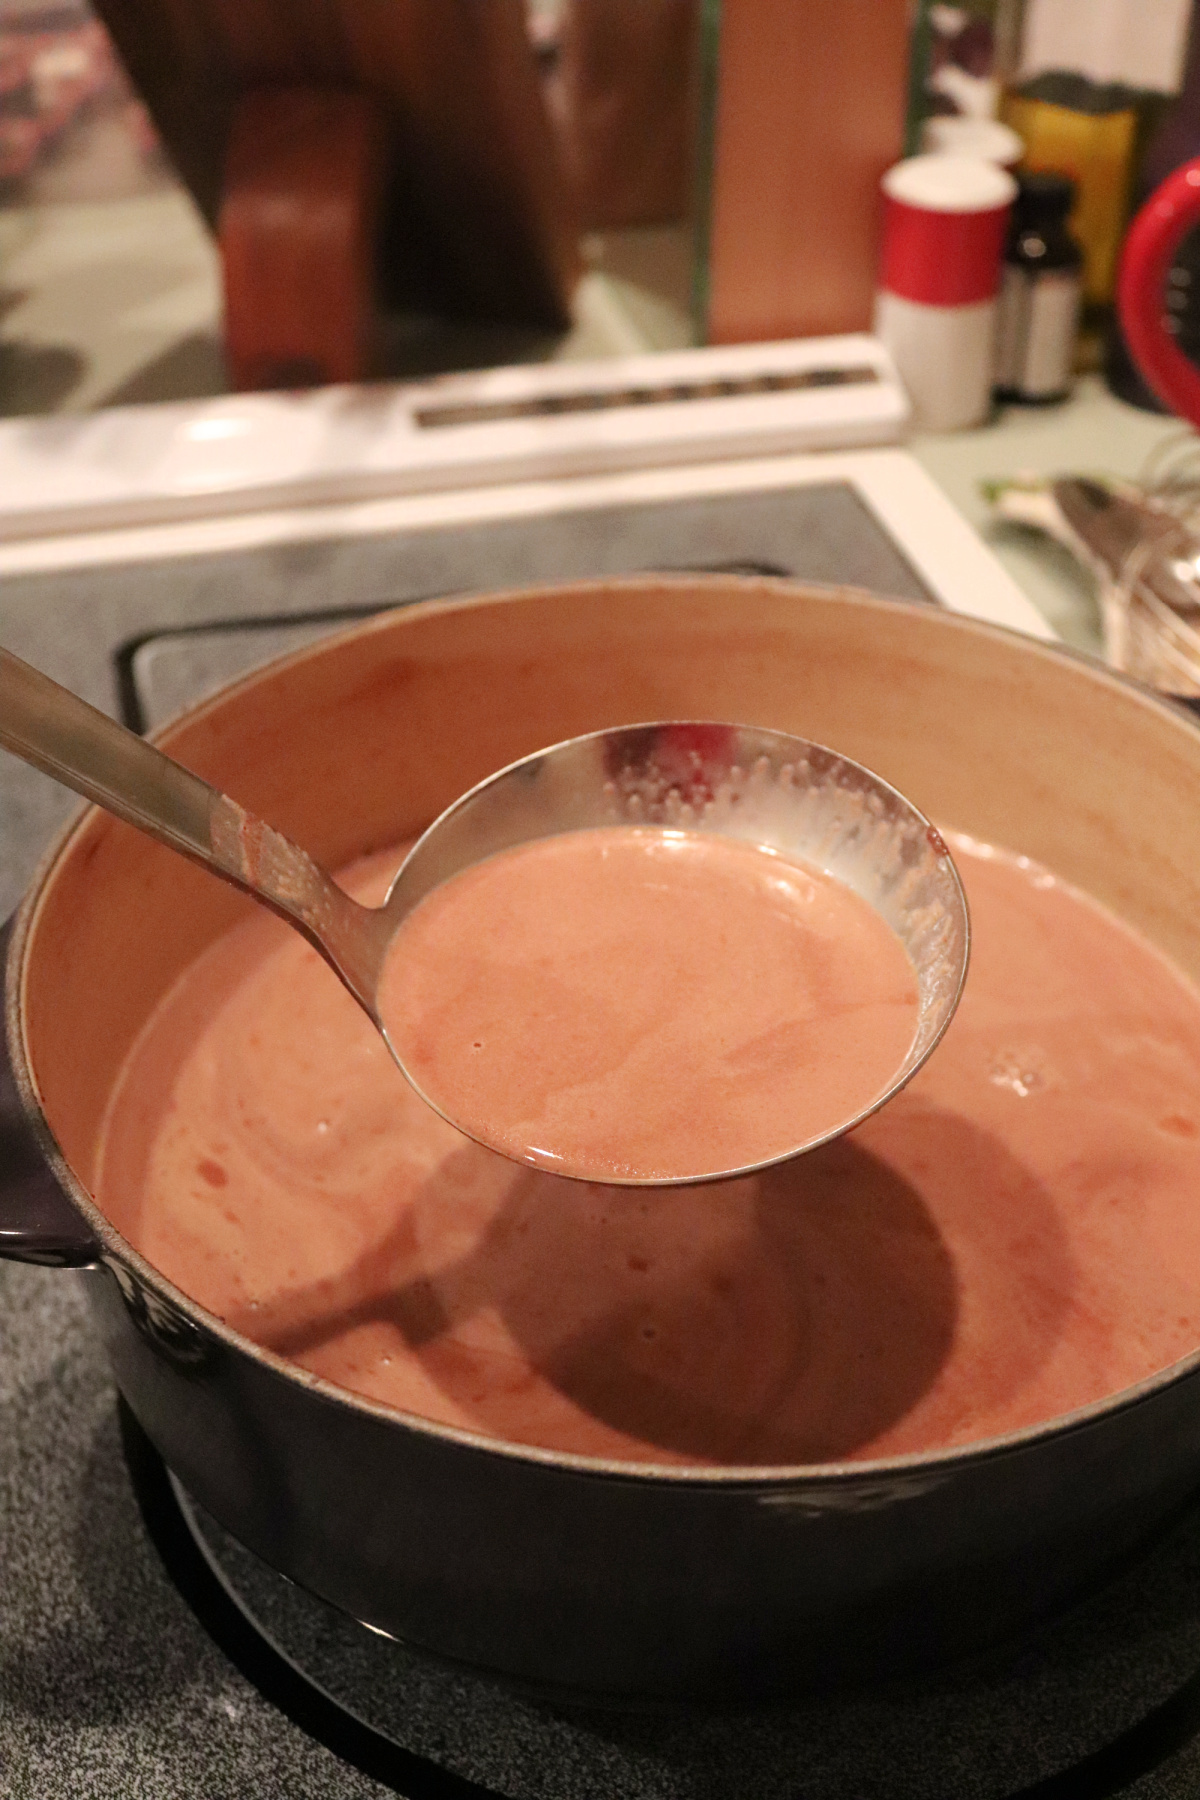 Hot chocolate in a ladle over a pot on the stove.